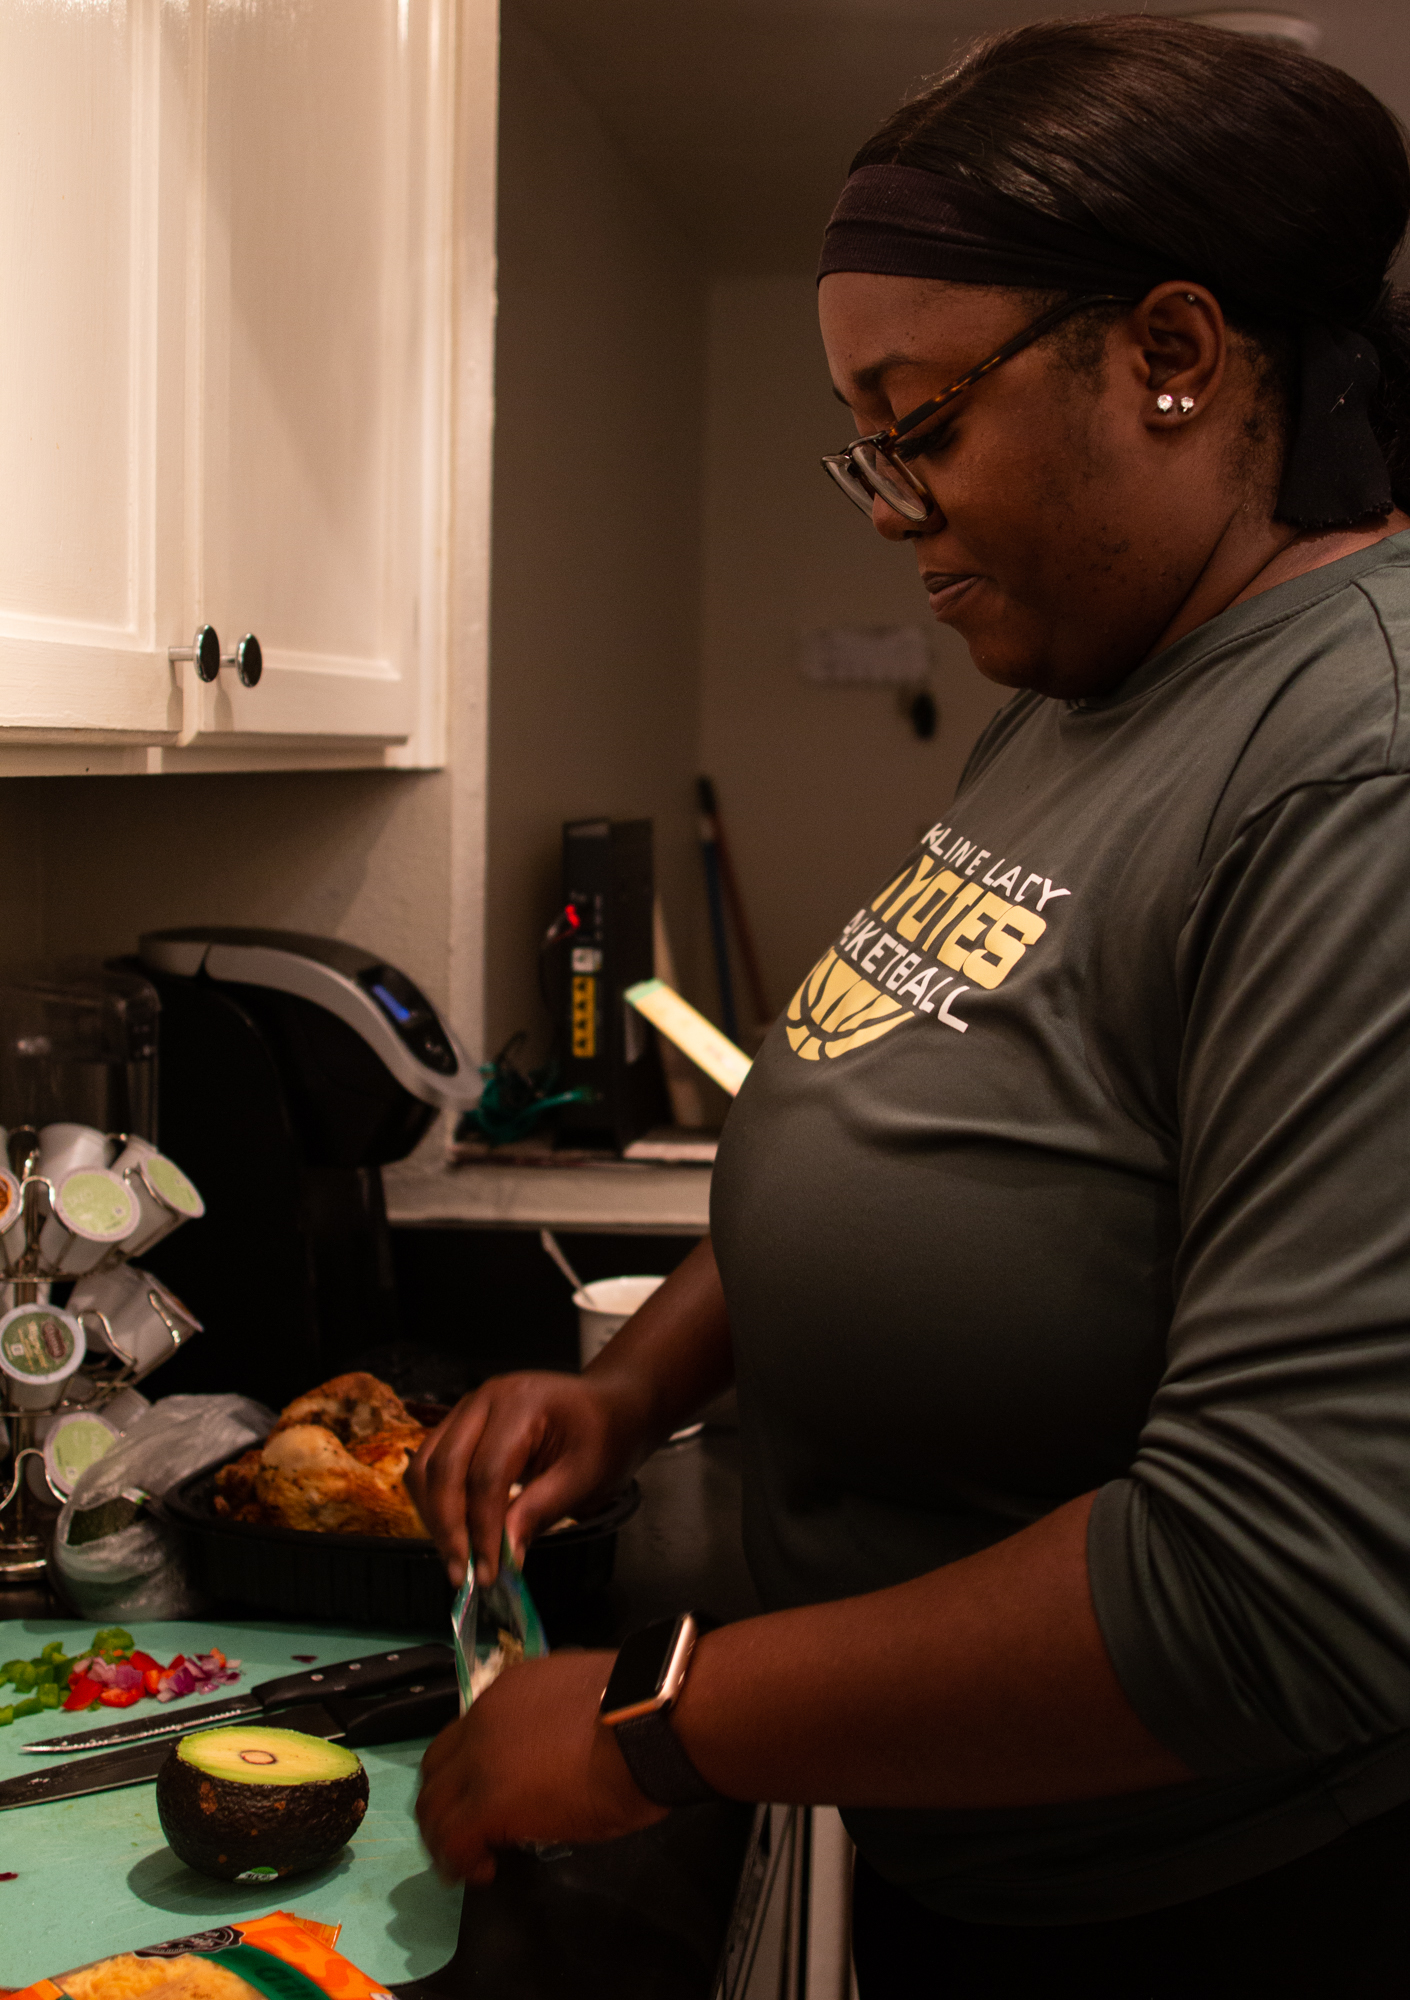  Chiniqua Bright prepares her lunch early in the morning on Nov. 15, 2018. She wakes up at 5 a.m. each day to get ready for work, often after nights of staying late at school for coaching or catching up on grading.  